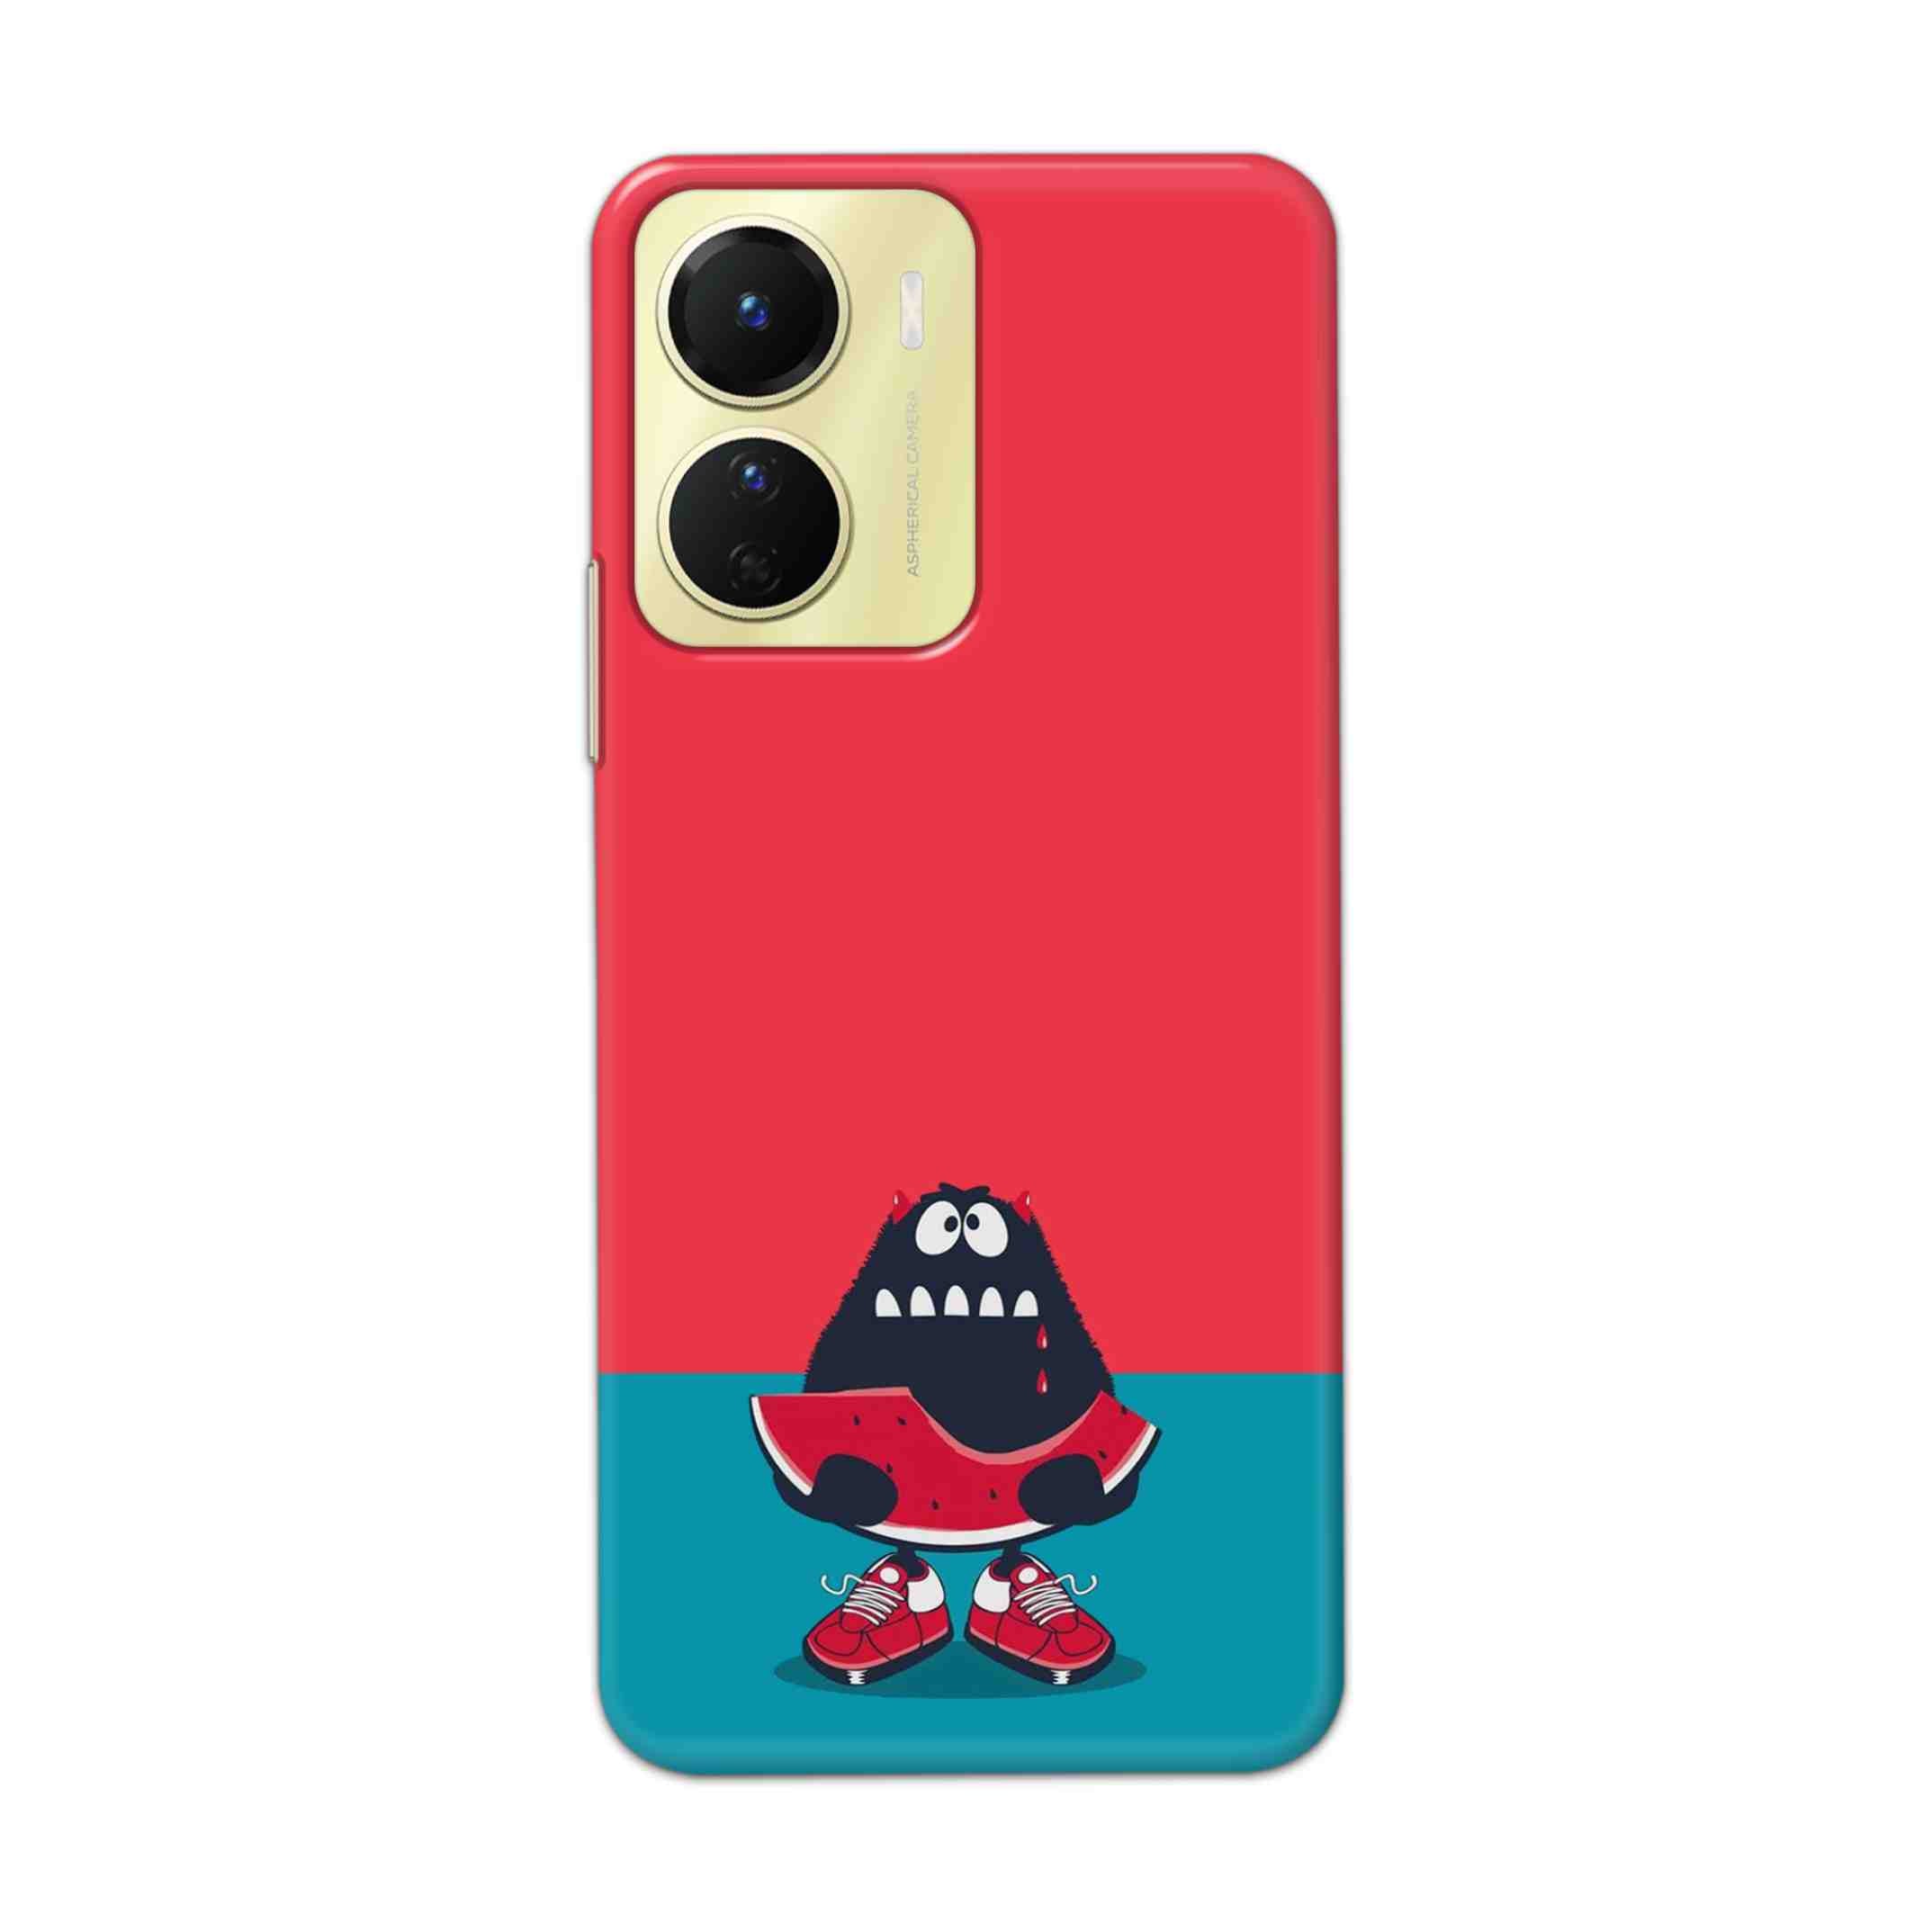 Buy Watermelon Hard Back Mobile Phone Case Cover For Vivo Y16 Online